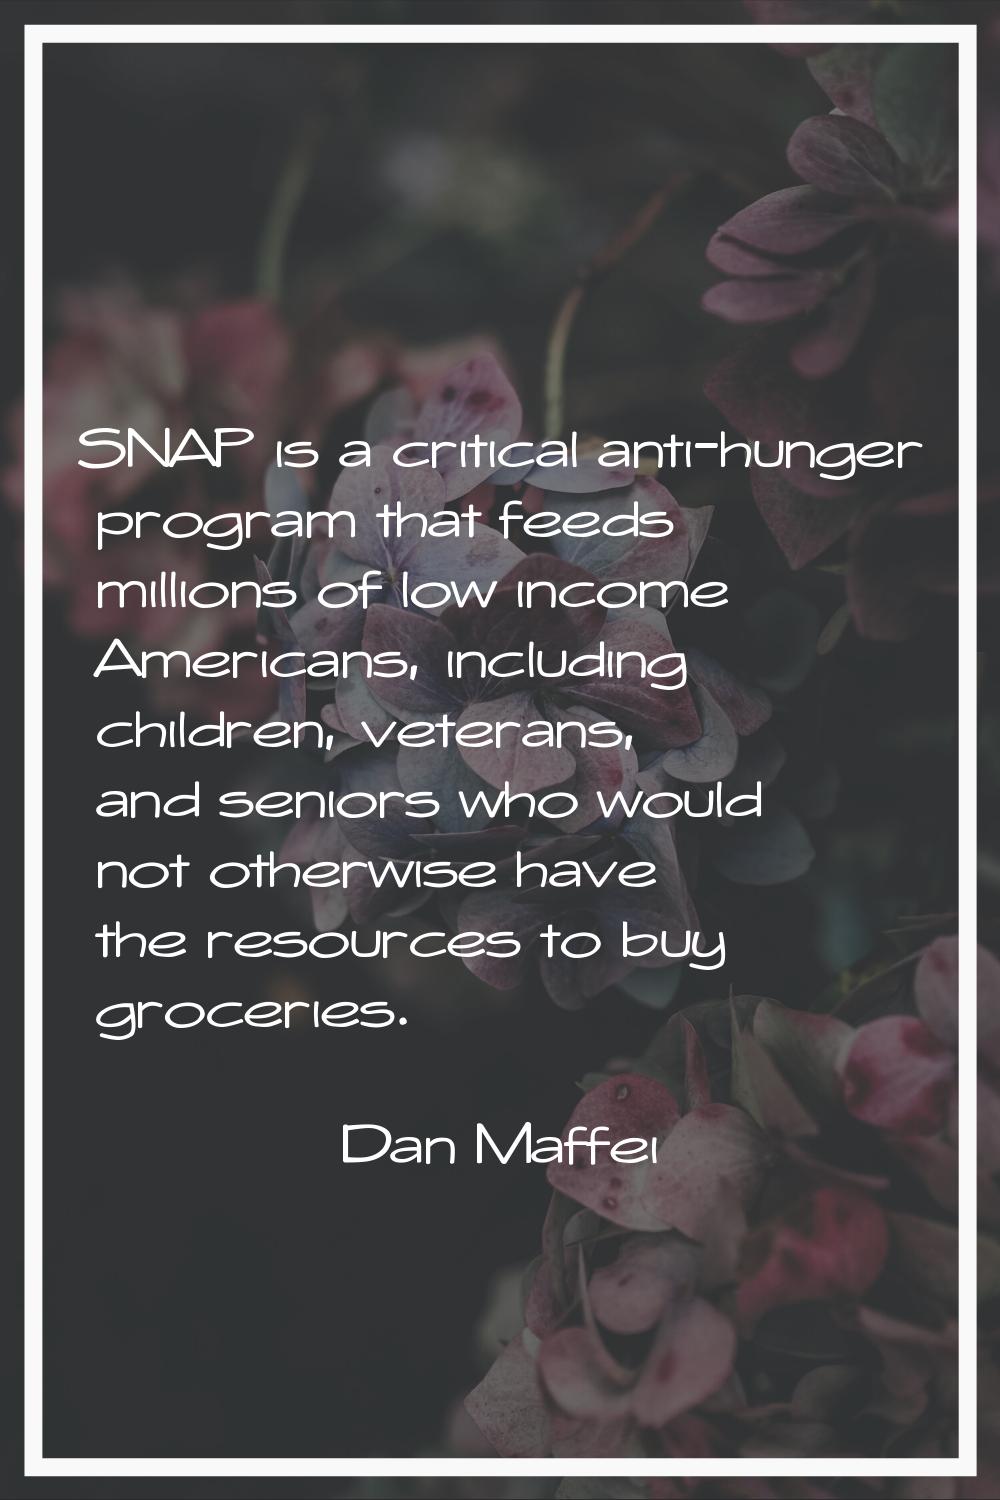 SNAP is a critical anti-hunger program that feeds millions of low income Americans, including child